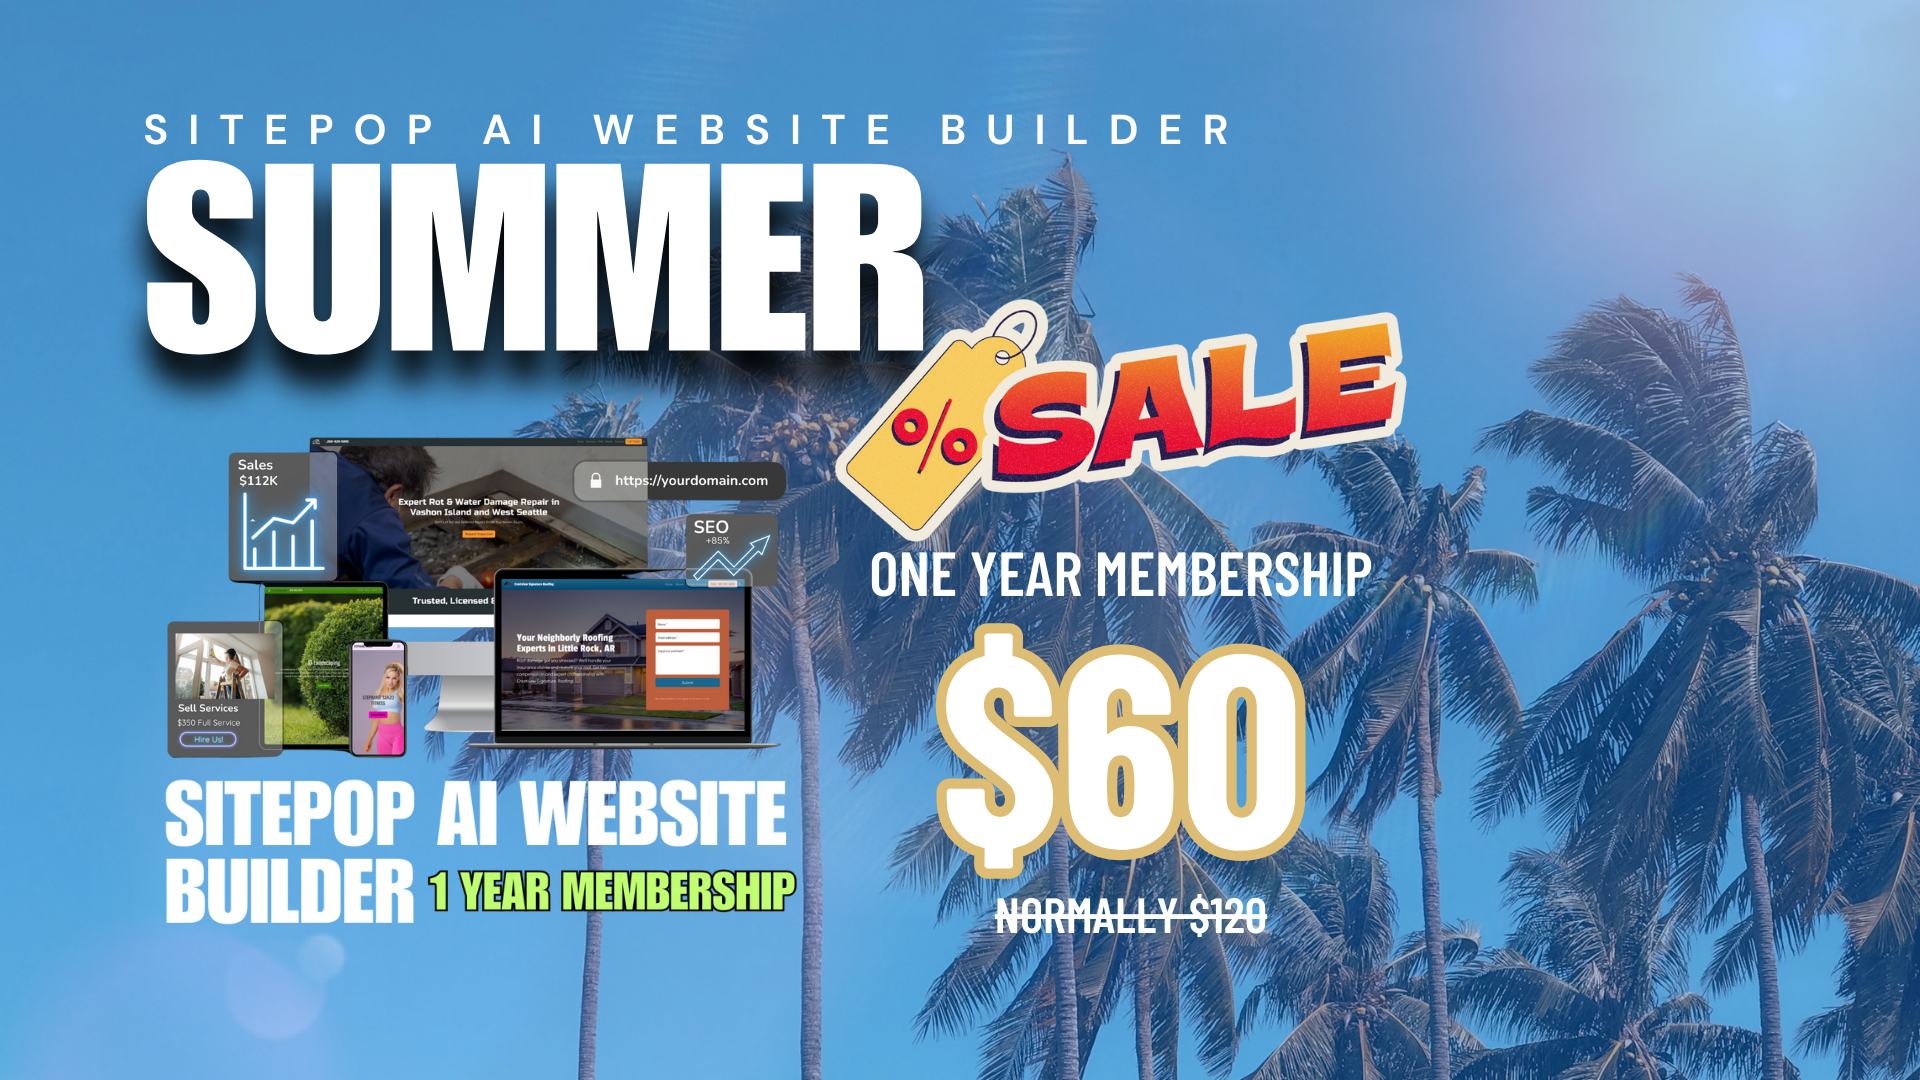 Summer Extravaganza Sale: Get 50% Off on One-Year Membership, Now Only $60!